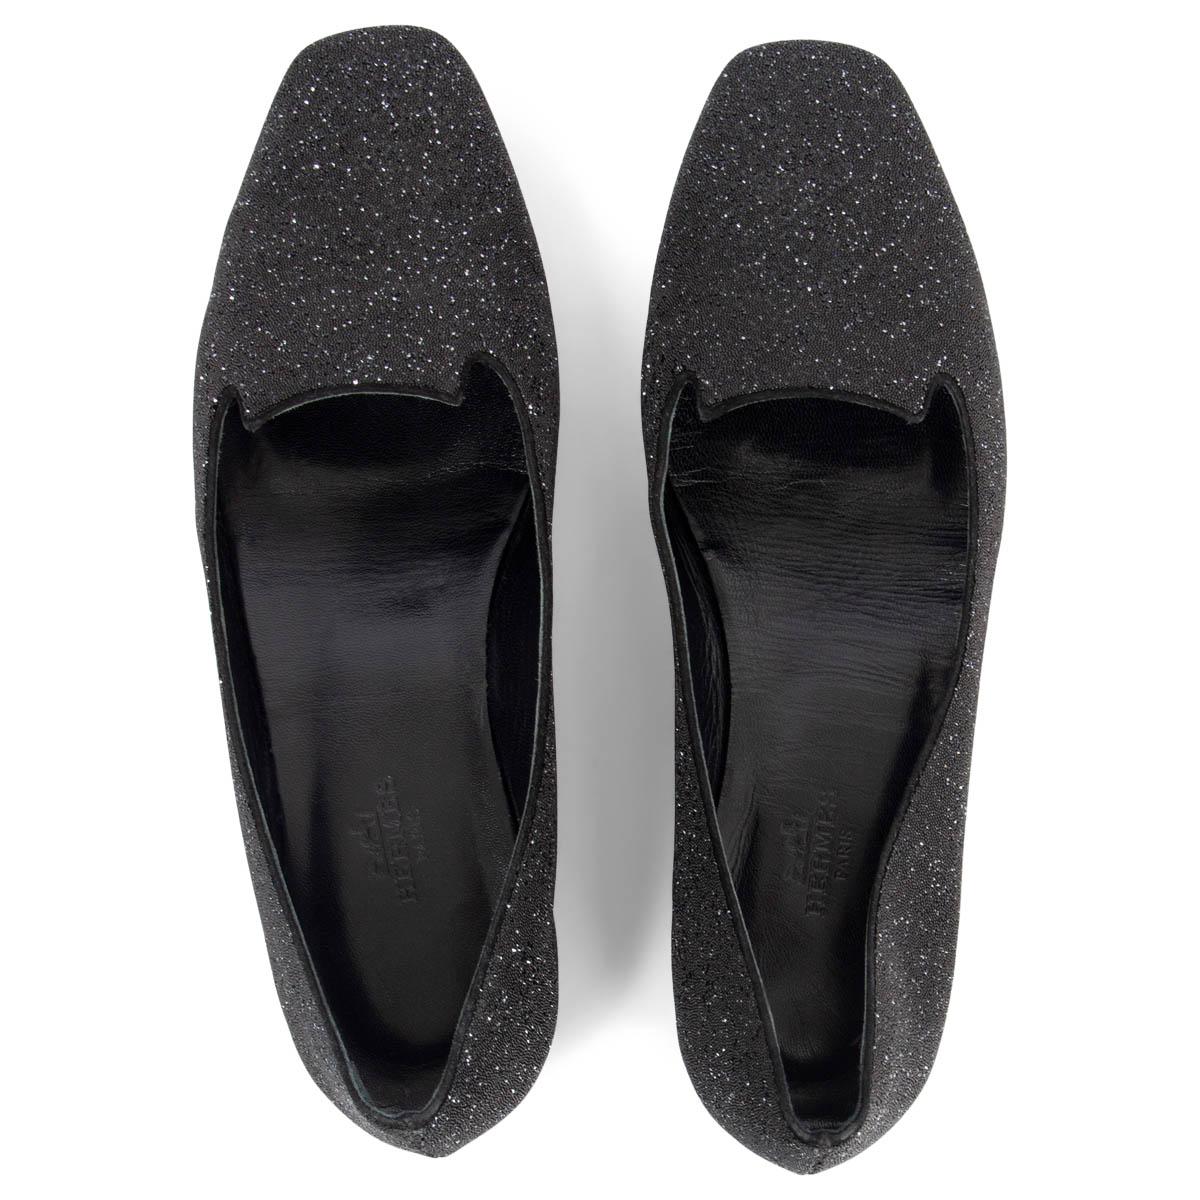 Black HERMES black leather HOLLY GLITTER Loafers Shoes 37.5 For Sale